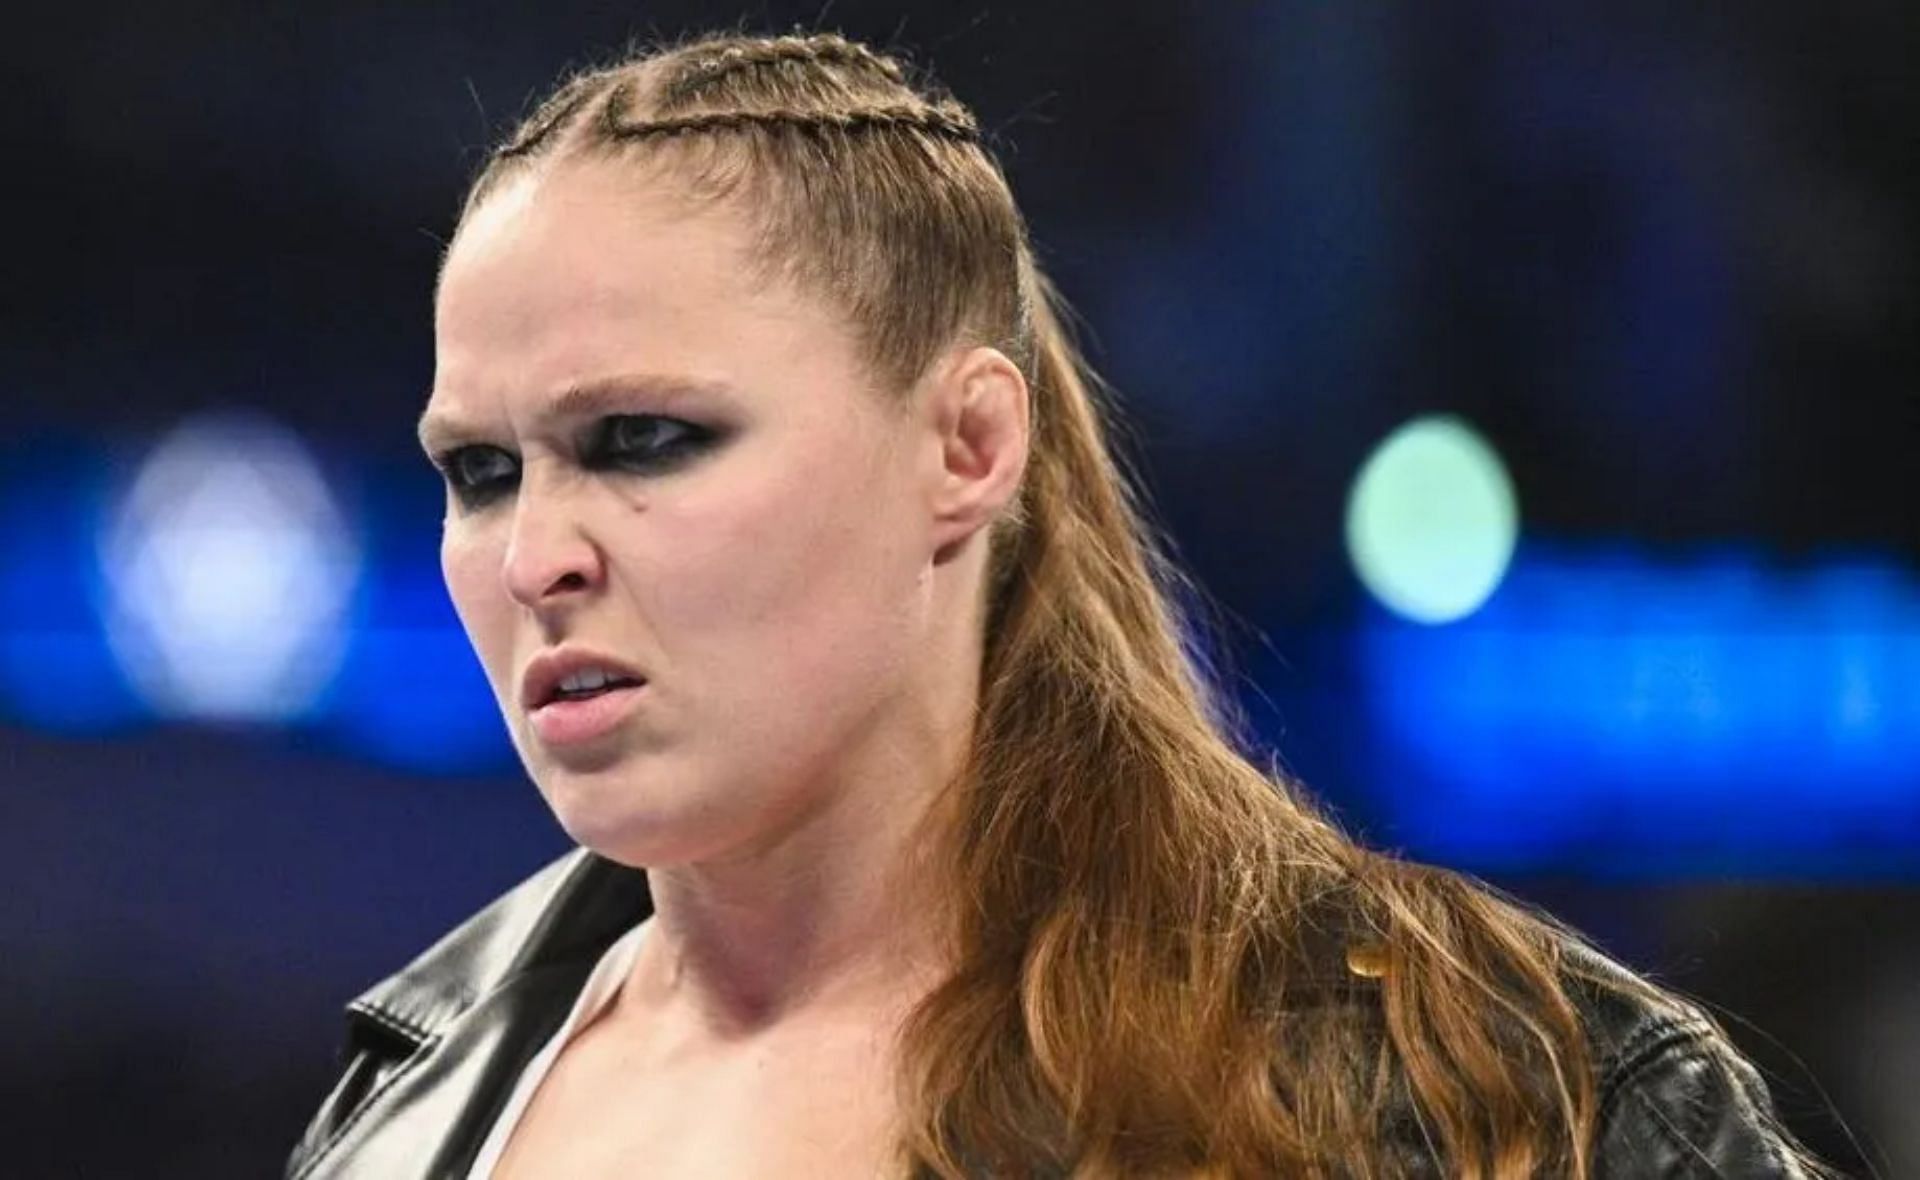 Rousey will be more than happy to spoil everything